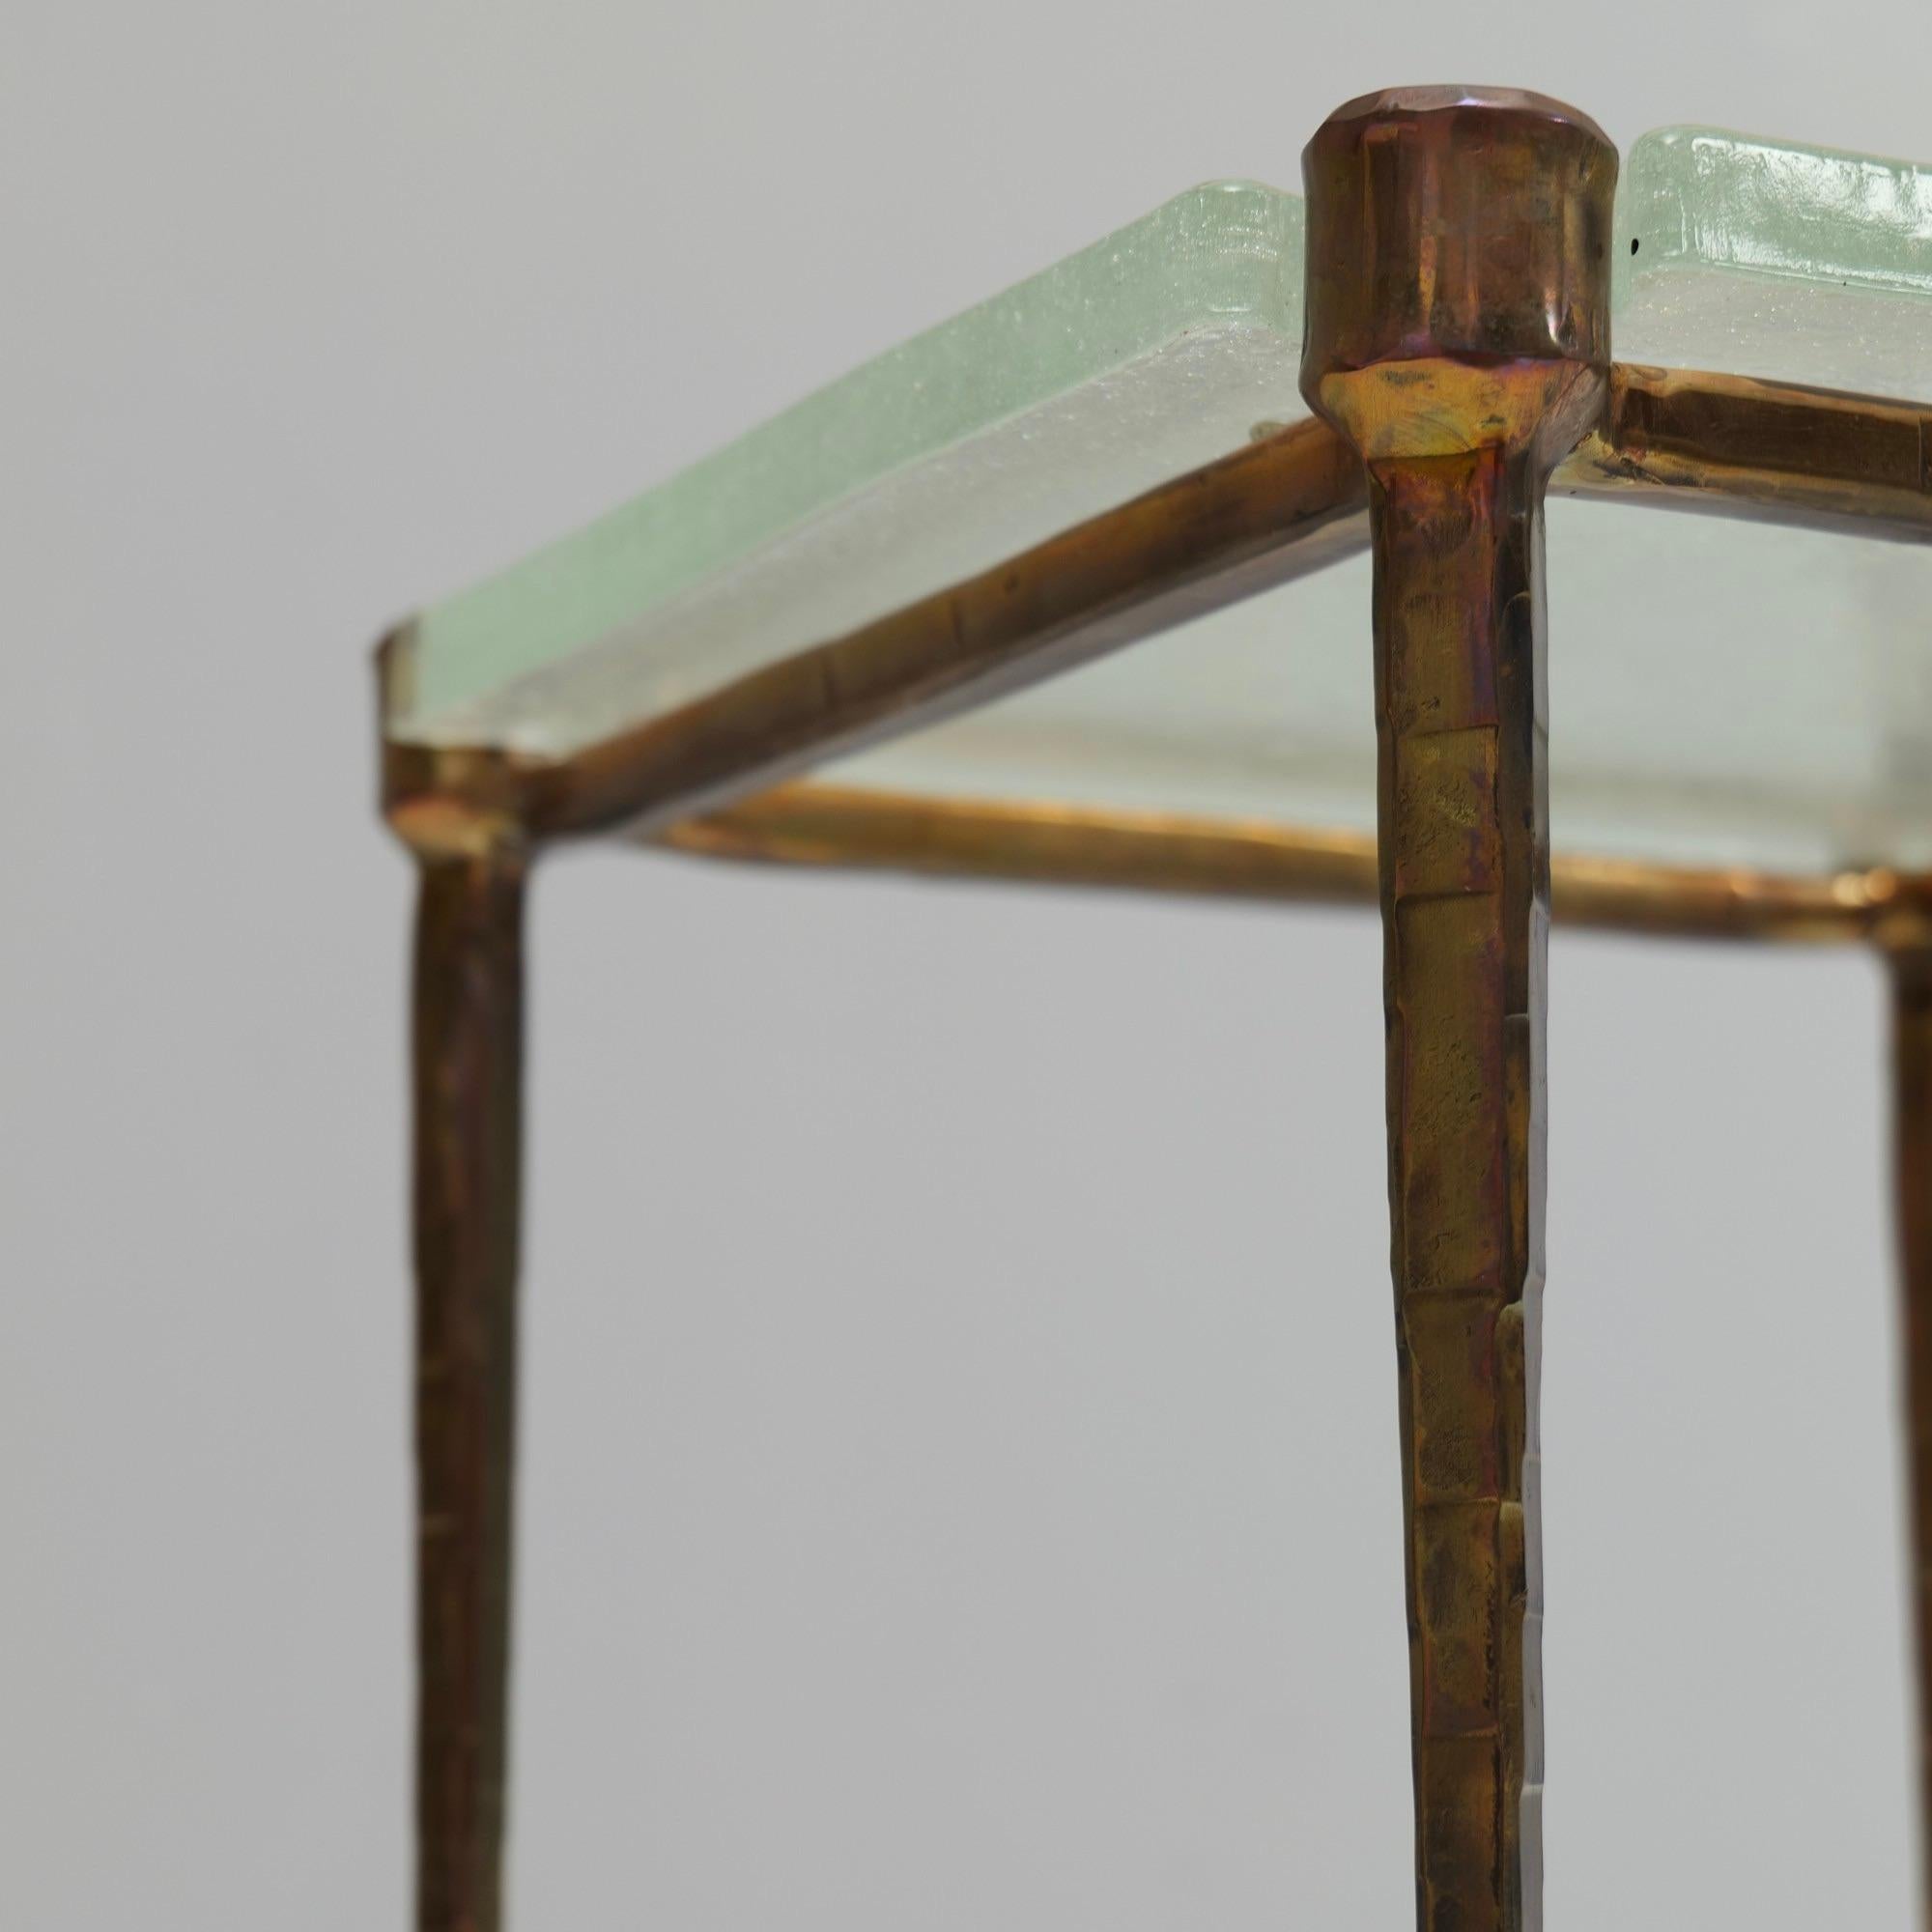 Brutalist tables made of forged bronze and cast glass from the 1980s This forging process of bronze is a bronze alloy developed by Lothar Klute.

In modern times, the production of such tables would be impossible for reasons of cost and